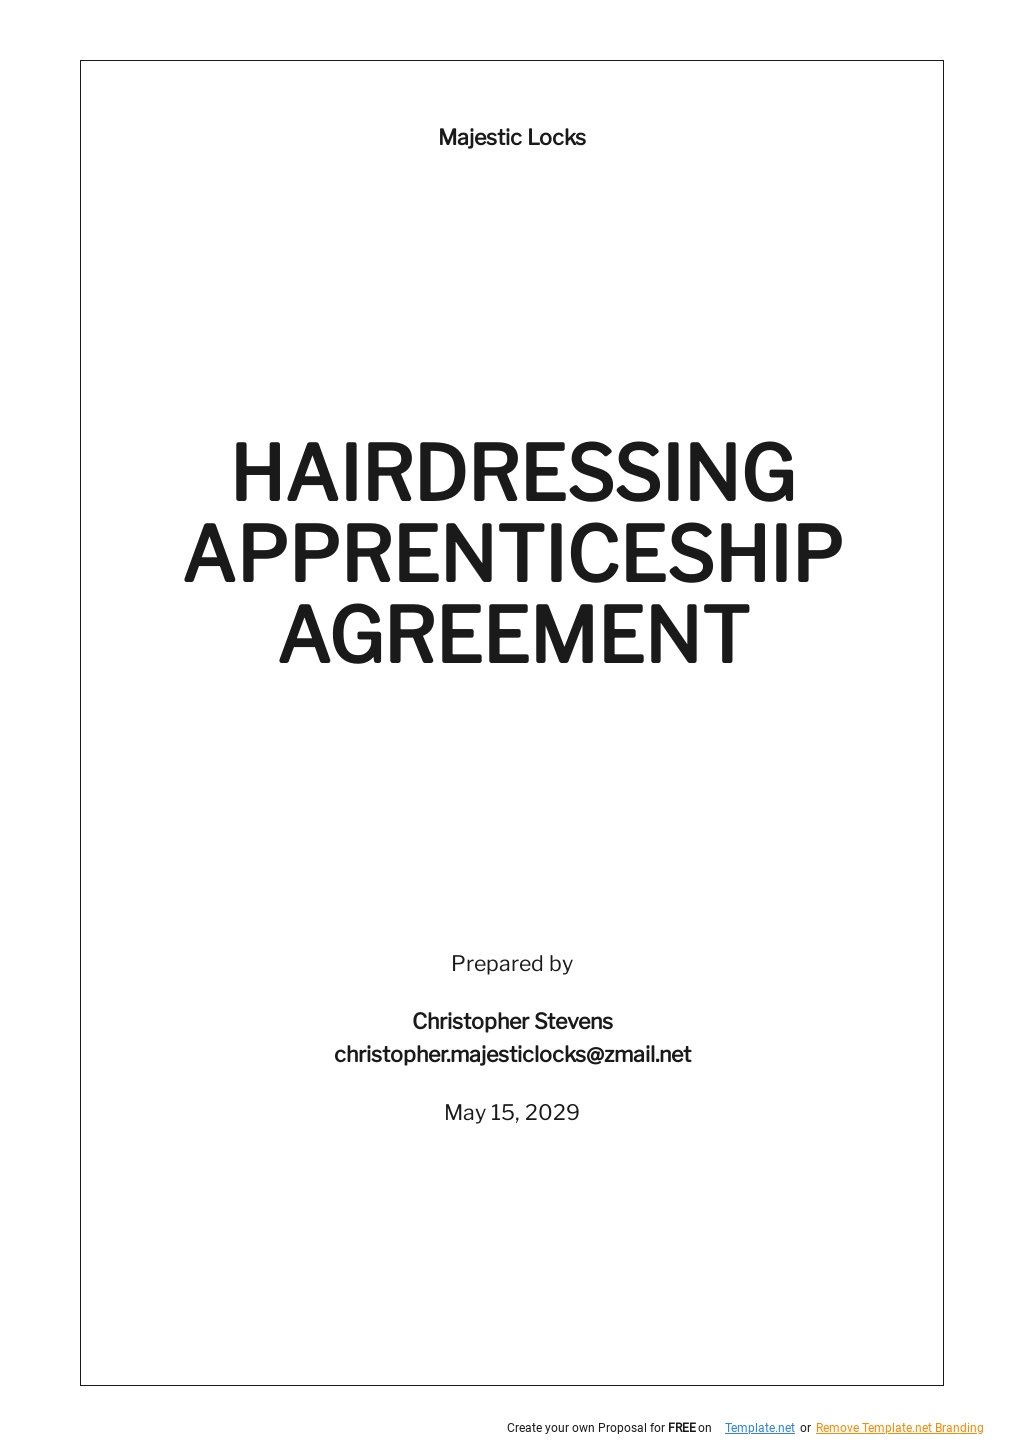 Hairdressing Apprenticeship Agreement Template - Google Docs, Word, Apple  Pages 